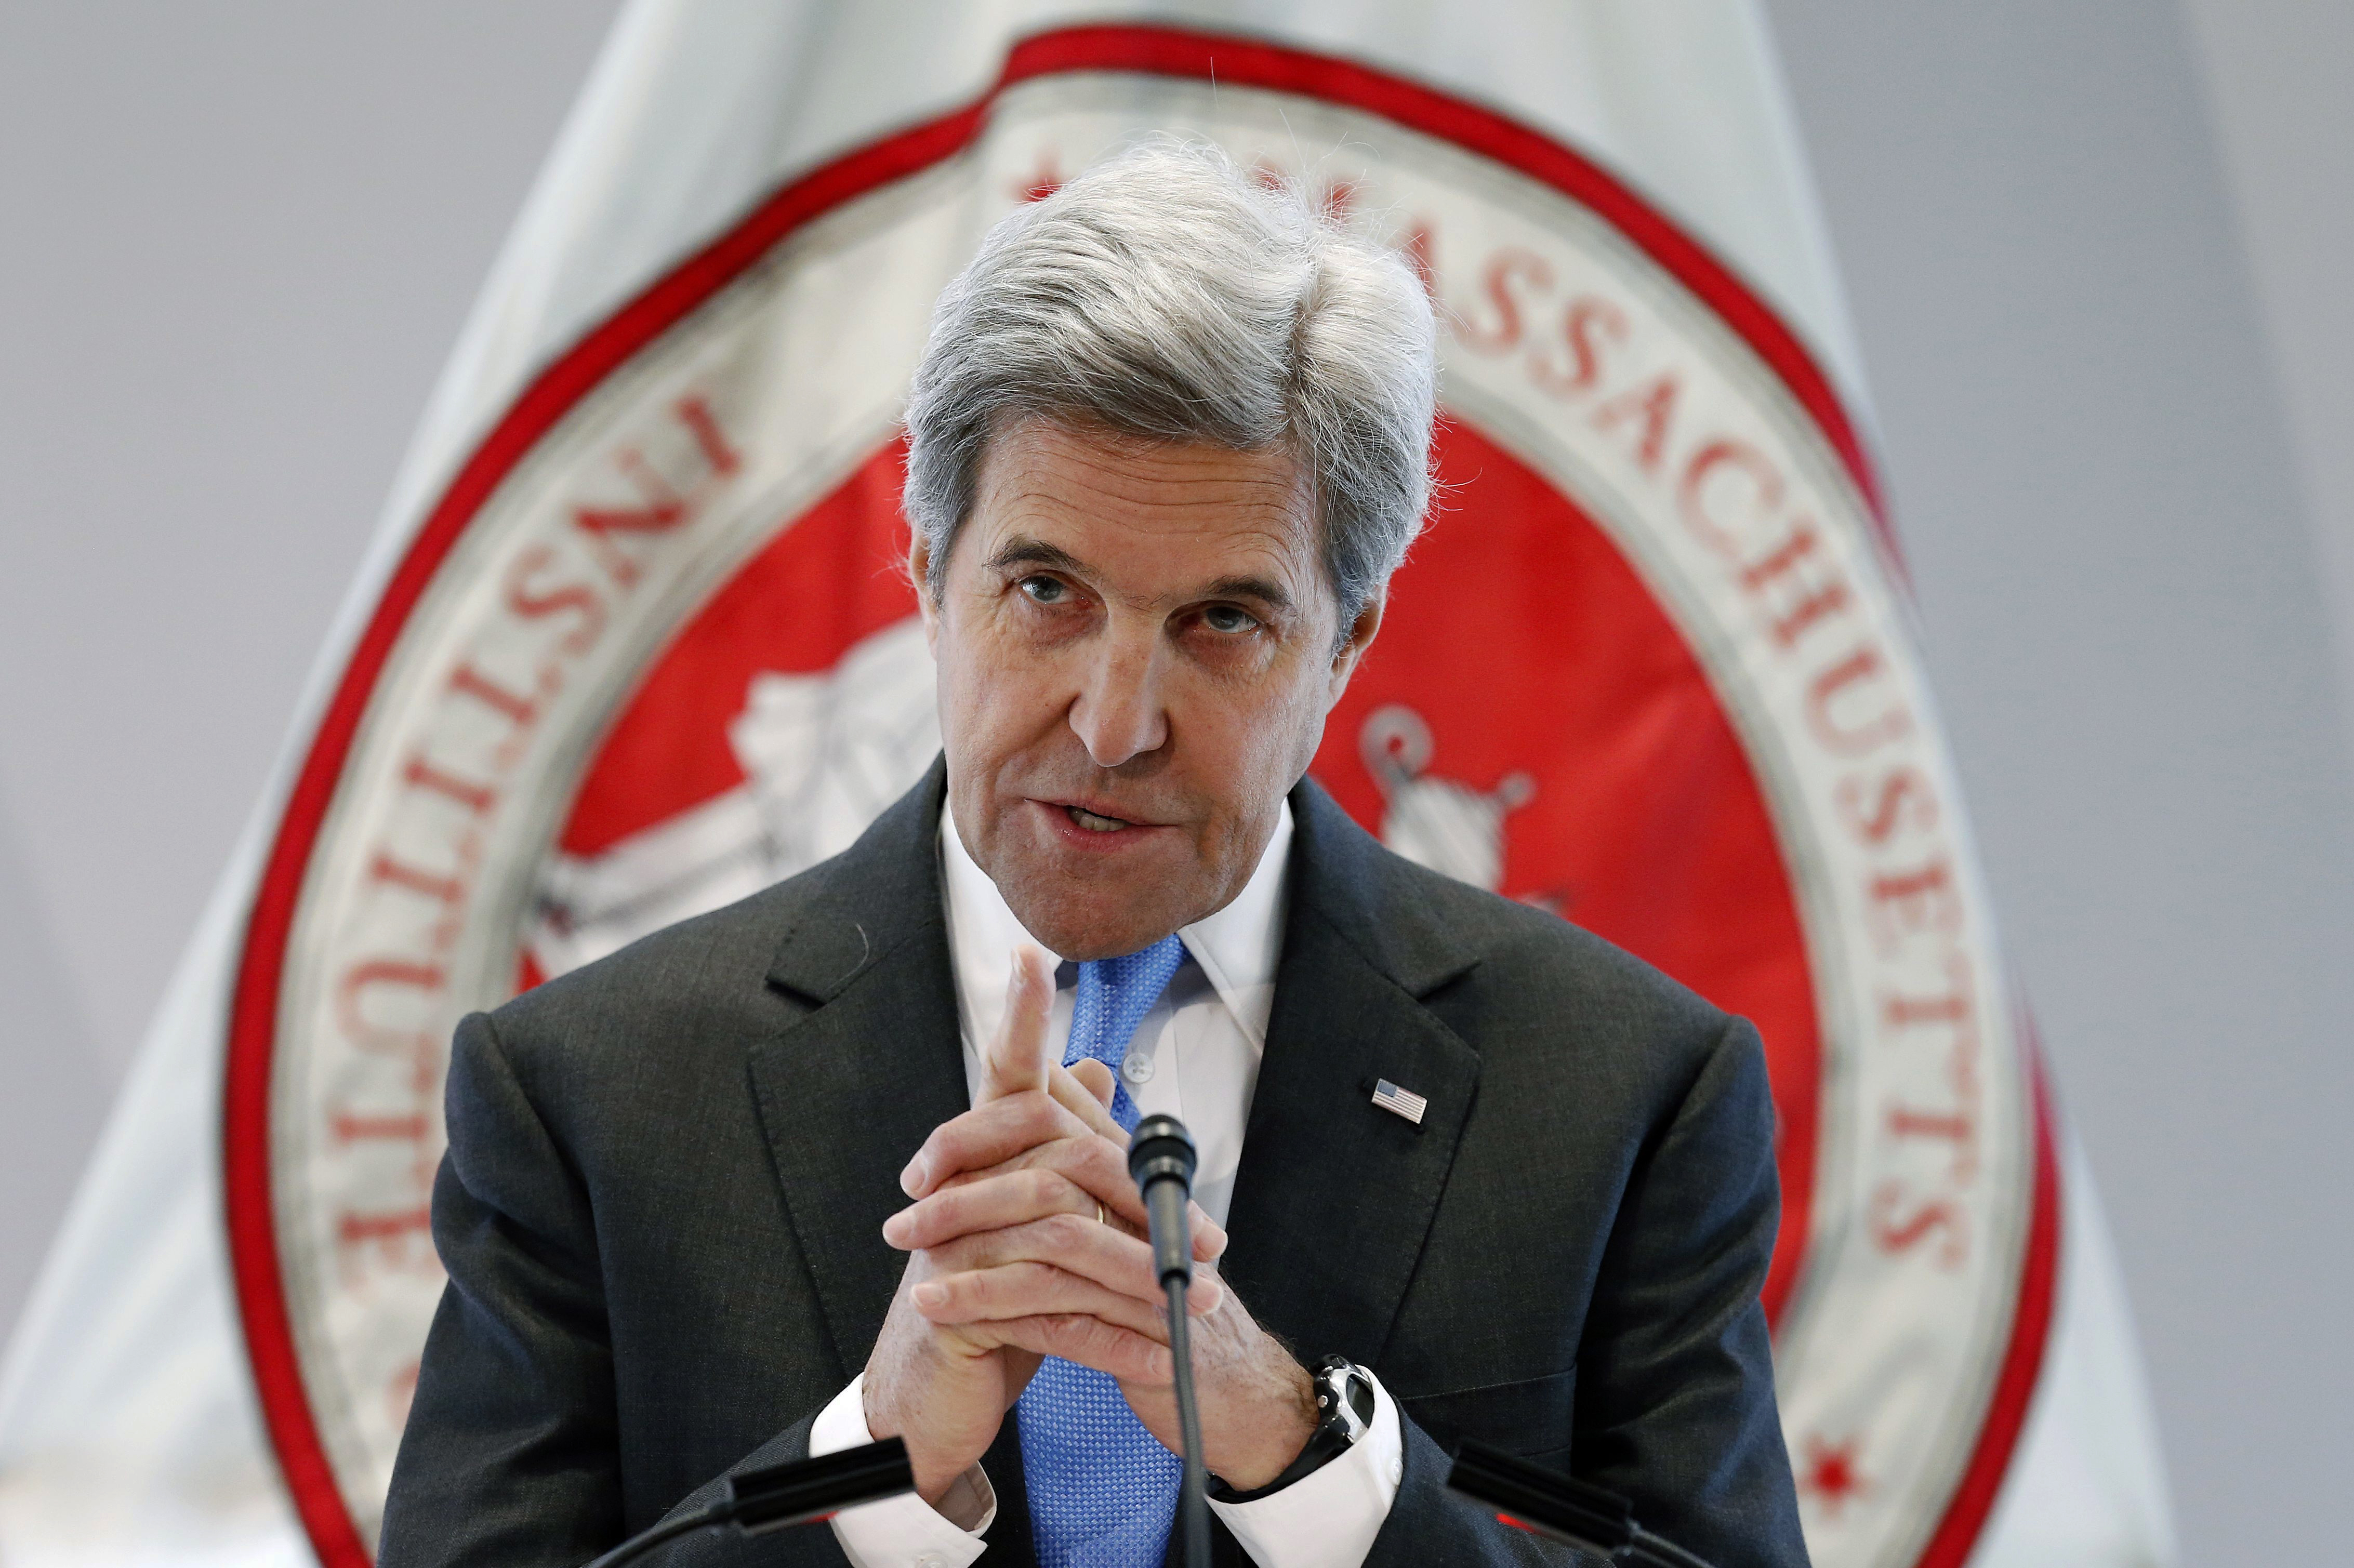 John Kerry apologizes for State Department's past treatment of gay employees - Washington Times